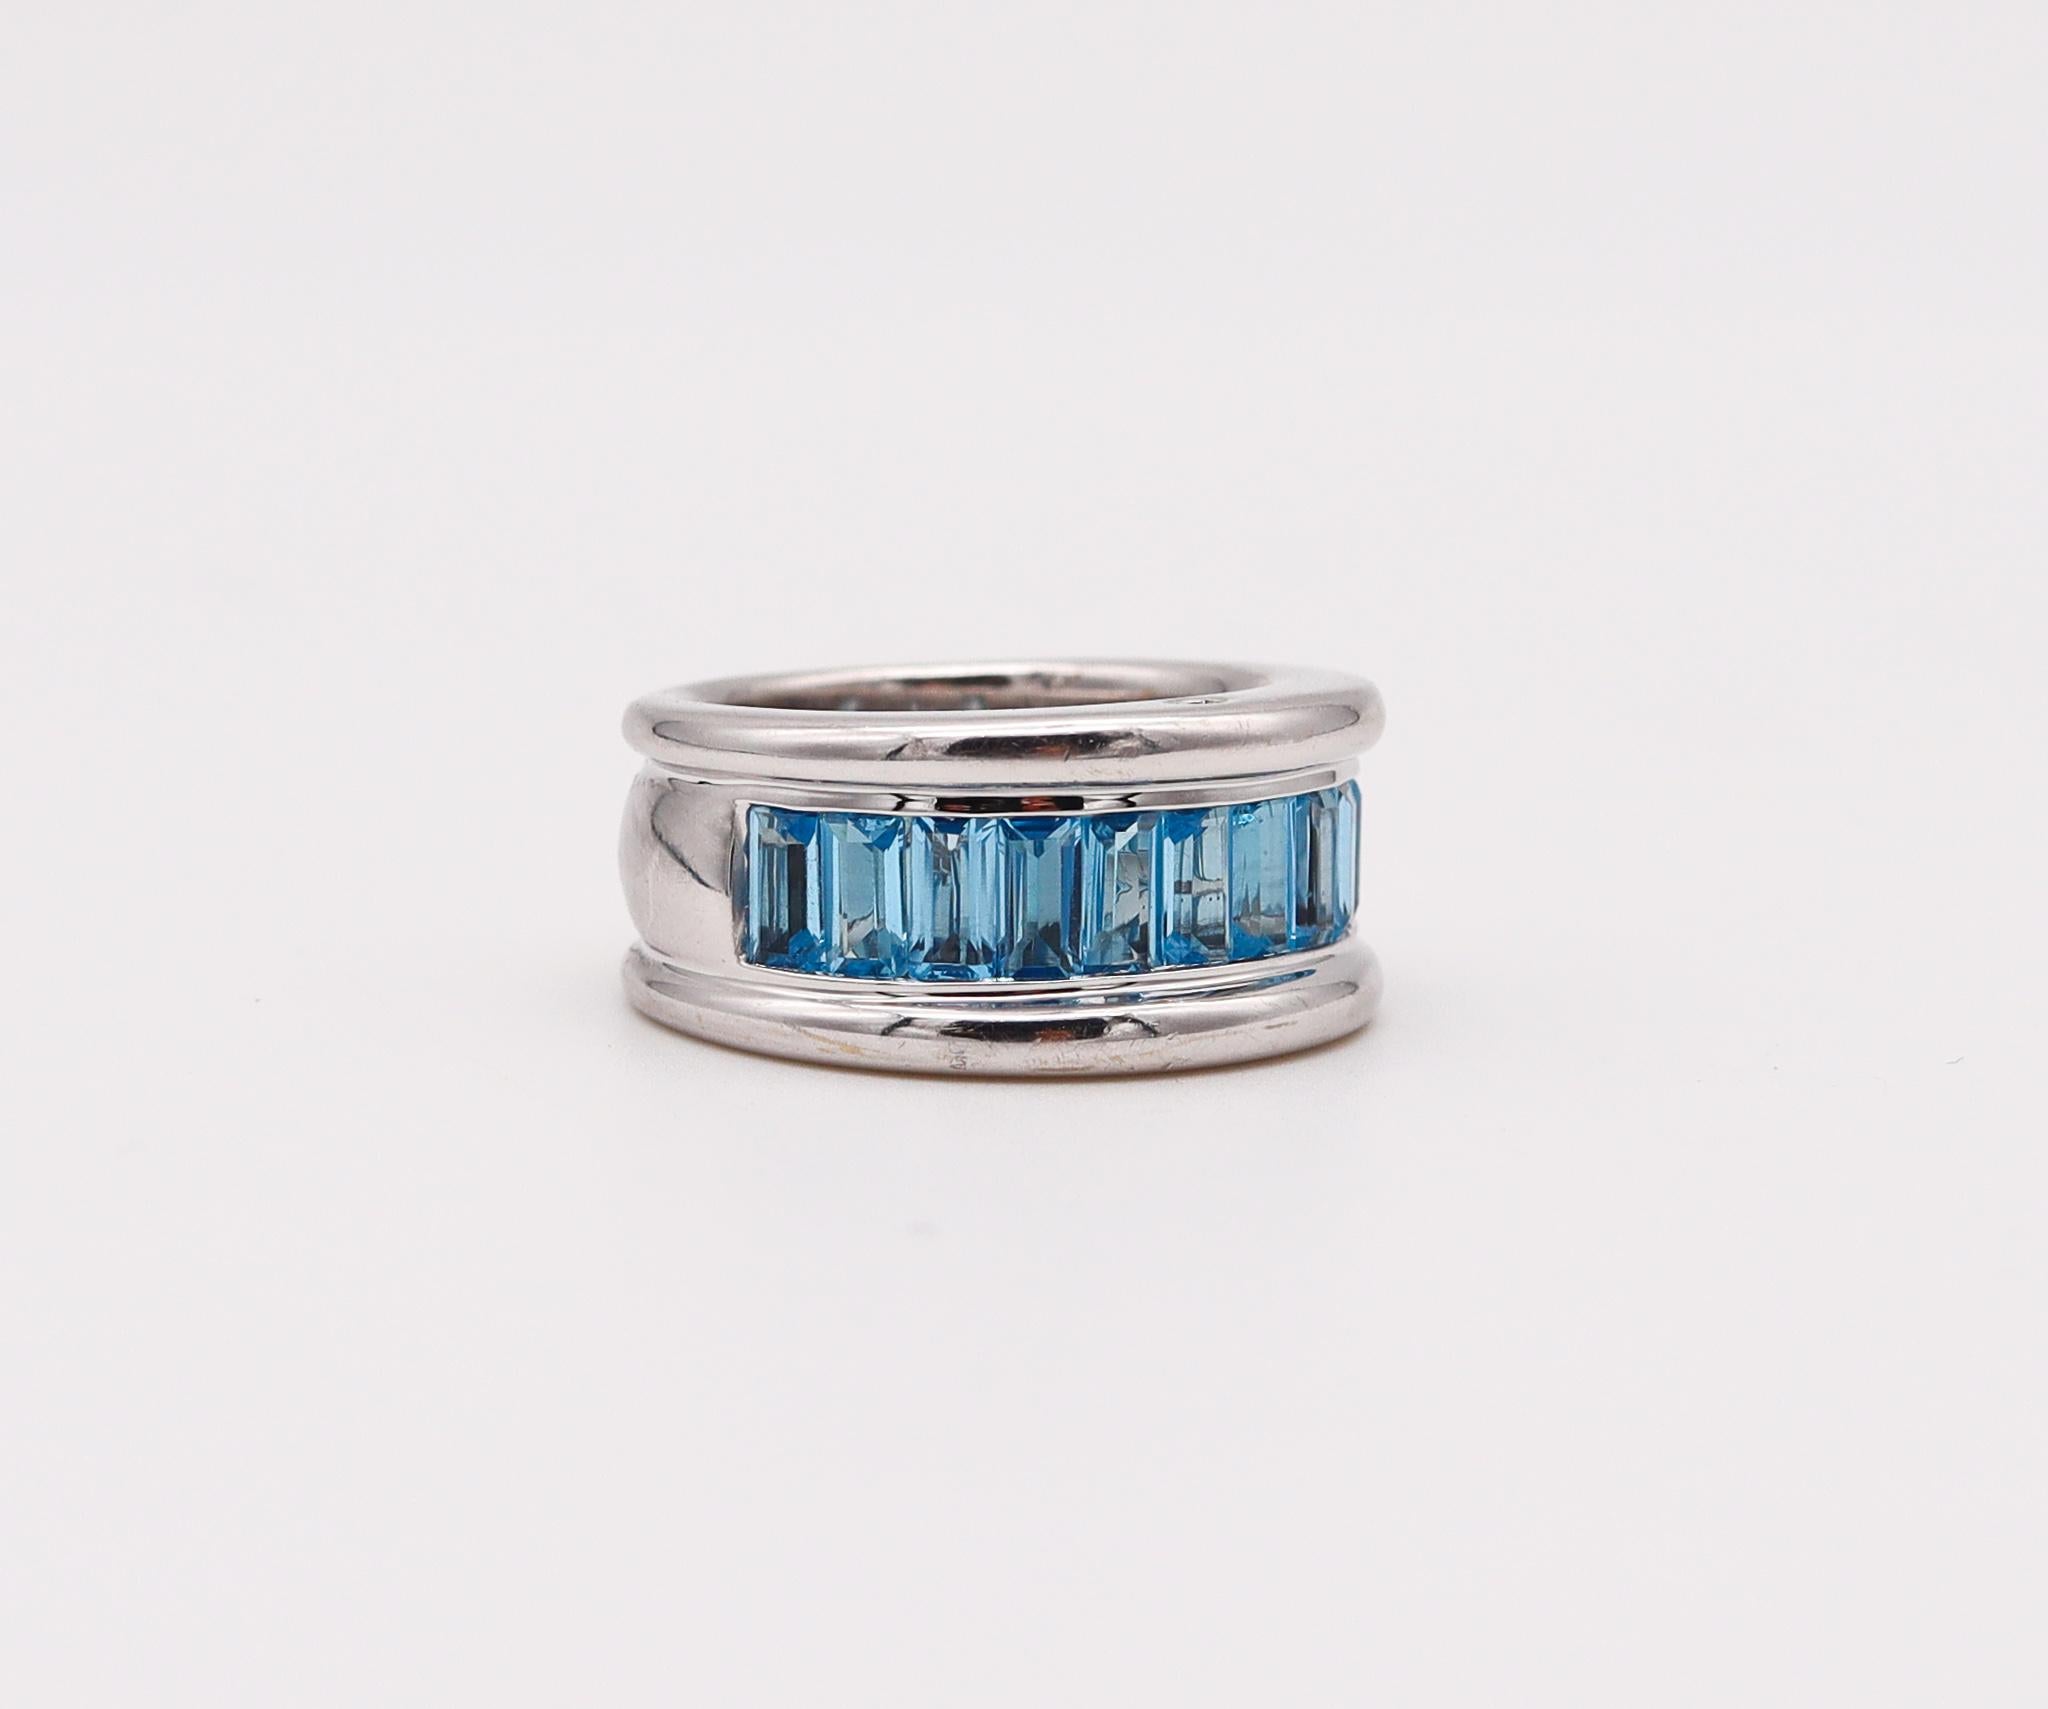 Gems set ring designed by H. Stern.

Beautiful piece, created by the Brazilian jewelry house of H. Stern. This contemporary band ring was crafted with a bold look in solid white gold of 18 karats with high polished finish.

Blue Topaz: Mount in a